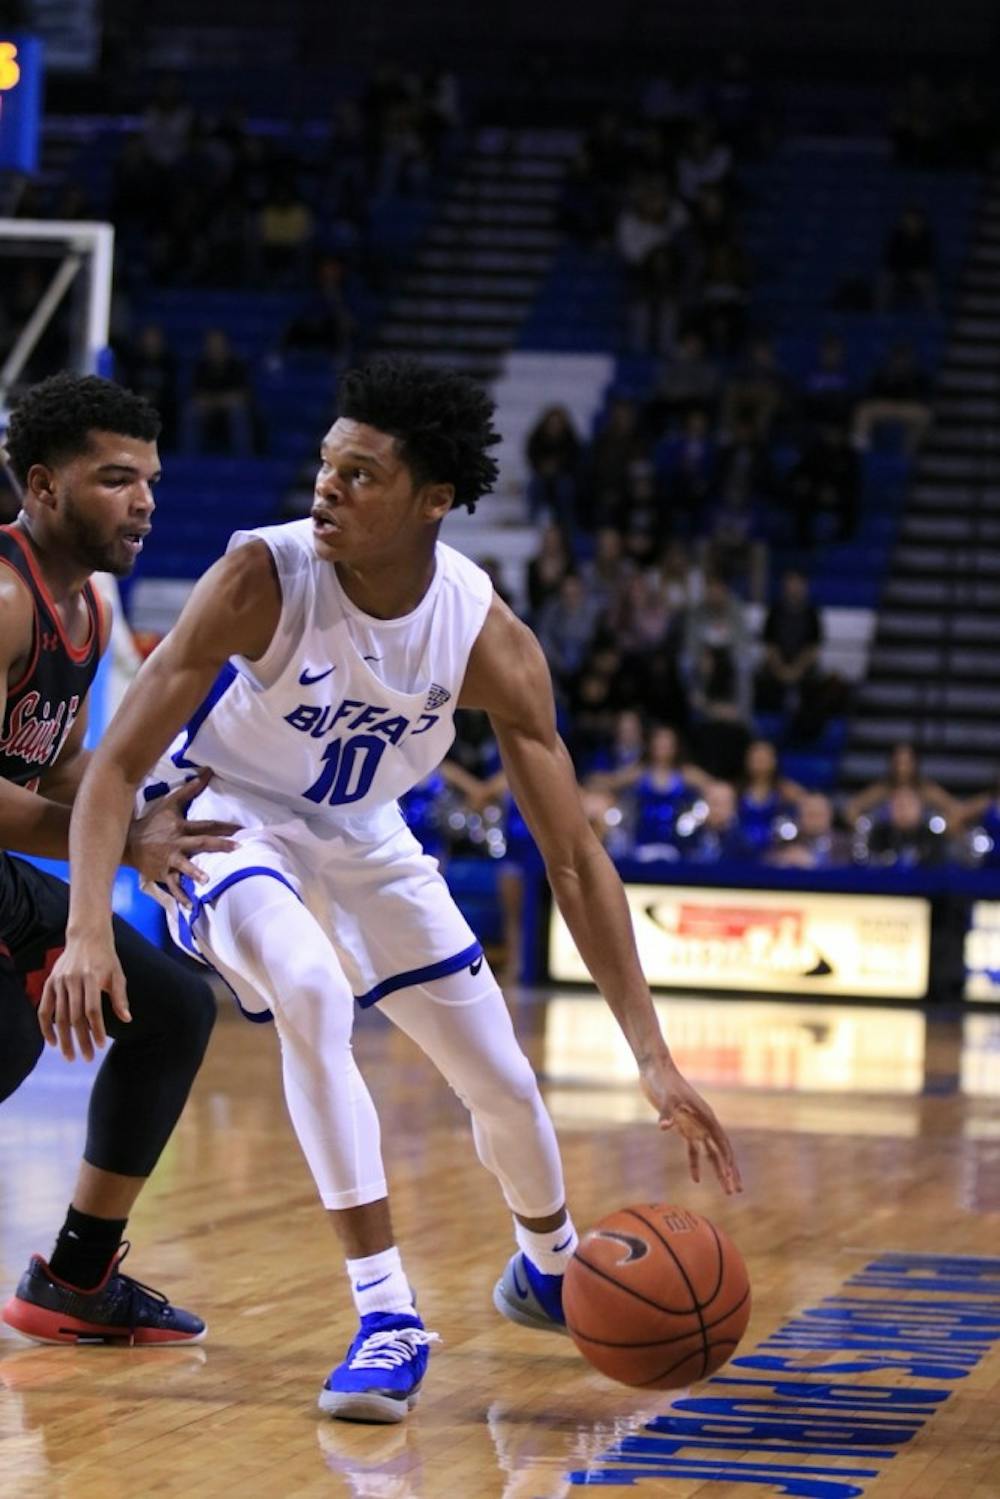 <p>Freshman guard Ronaldo Segu posts up on a Saint Francis player. The Bulls are 3-0 after Monday night’s 62-53 win over the Southern Illinois Salukis.</p>